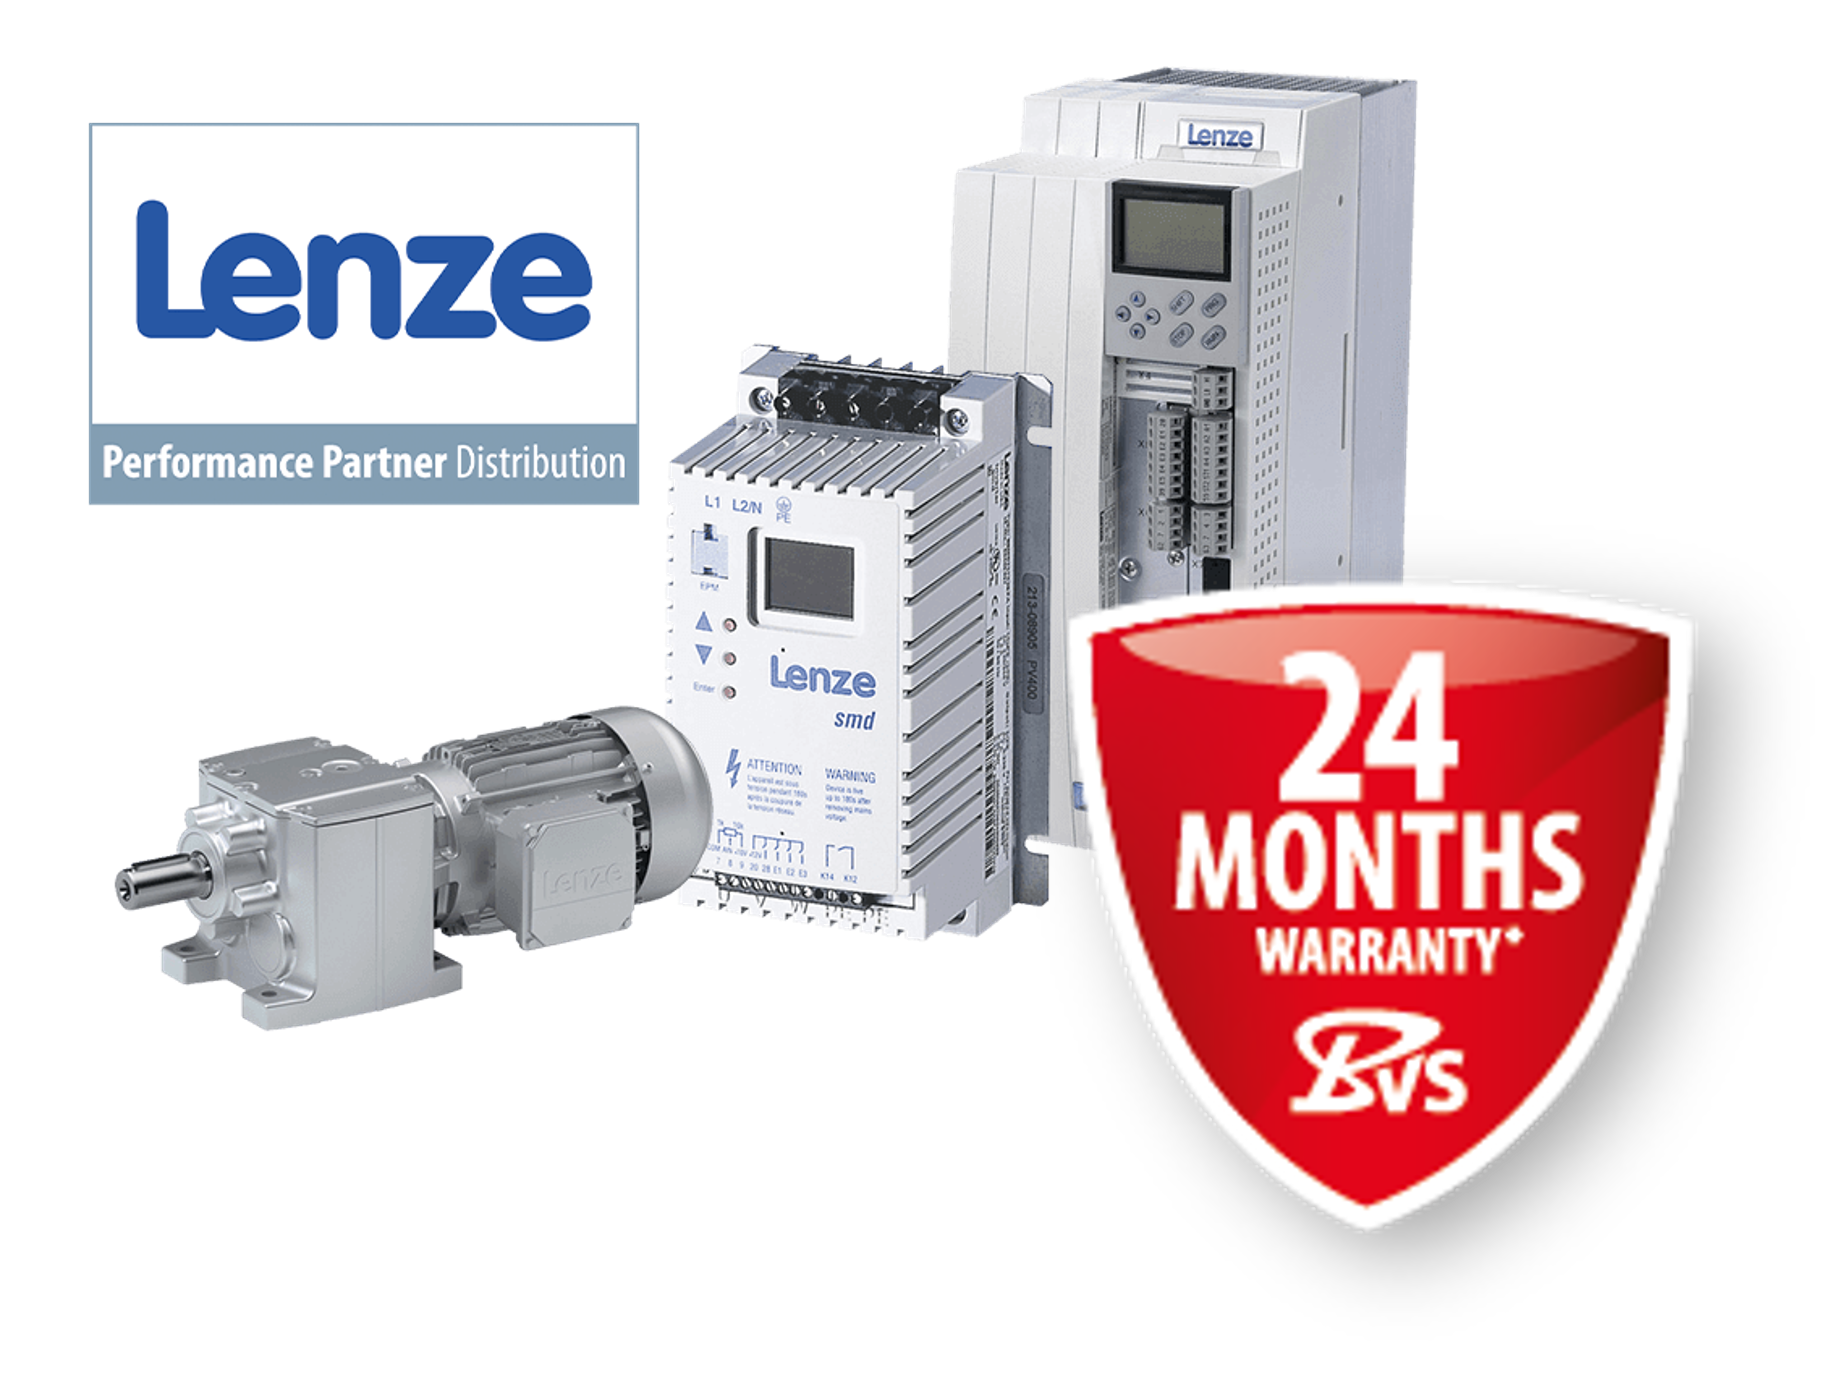 Lenze | Reconditioning repairs, refurbished spare parts, new parts, service